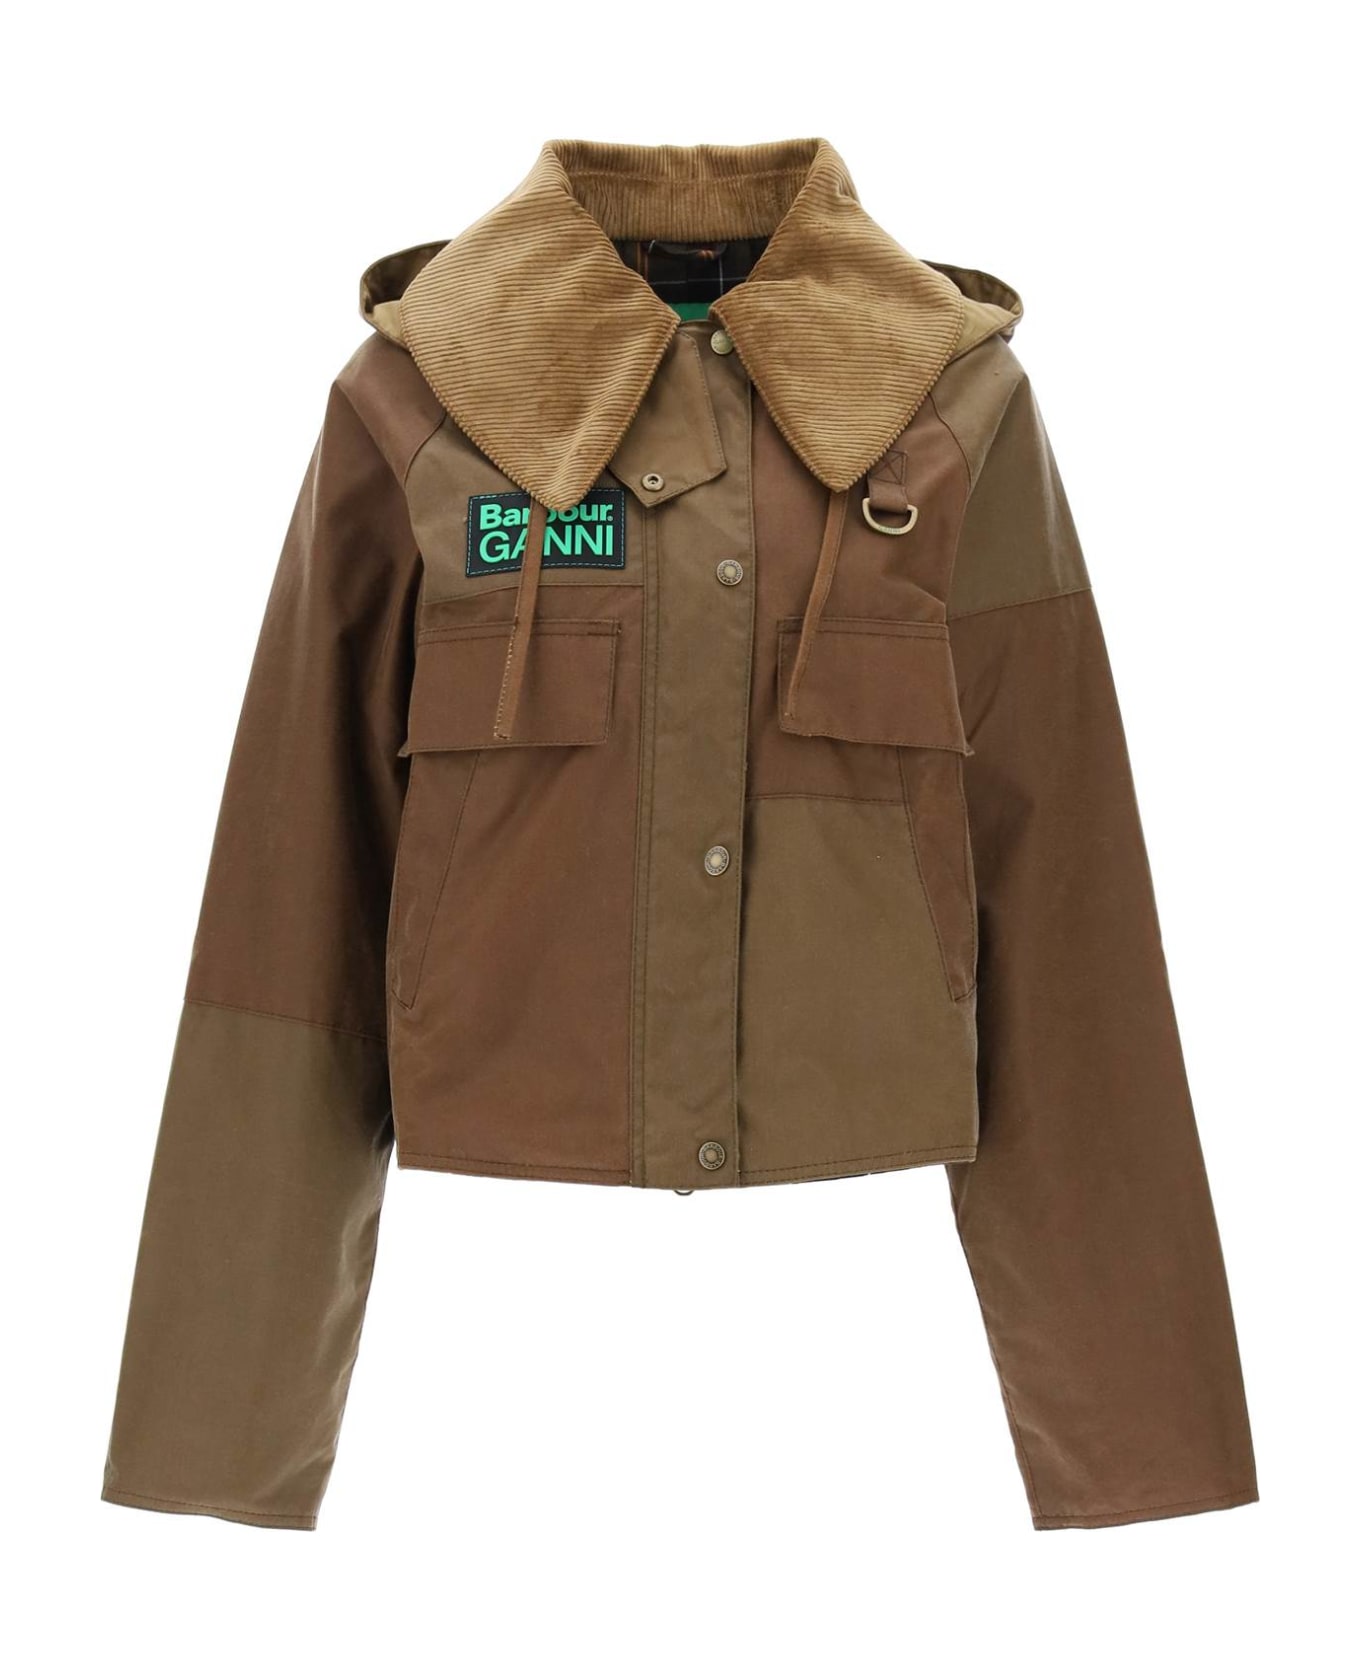 Barbour Block Spey Waxed Jacket - TAN SAND CLASSIC (Brown)